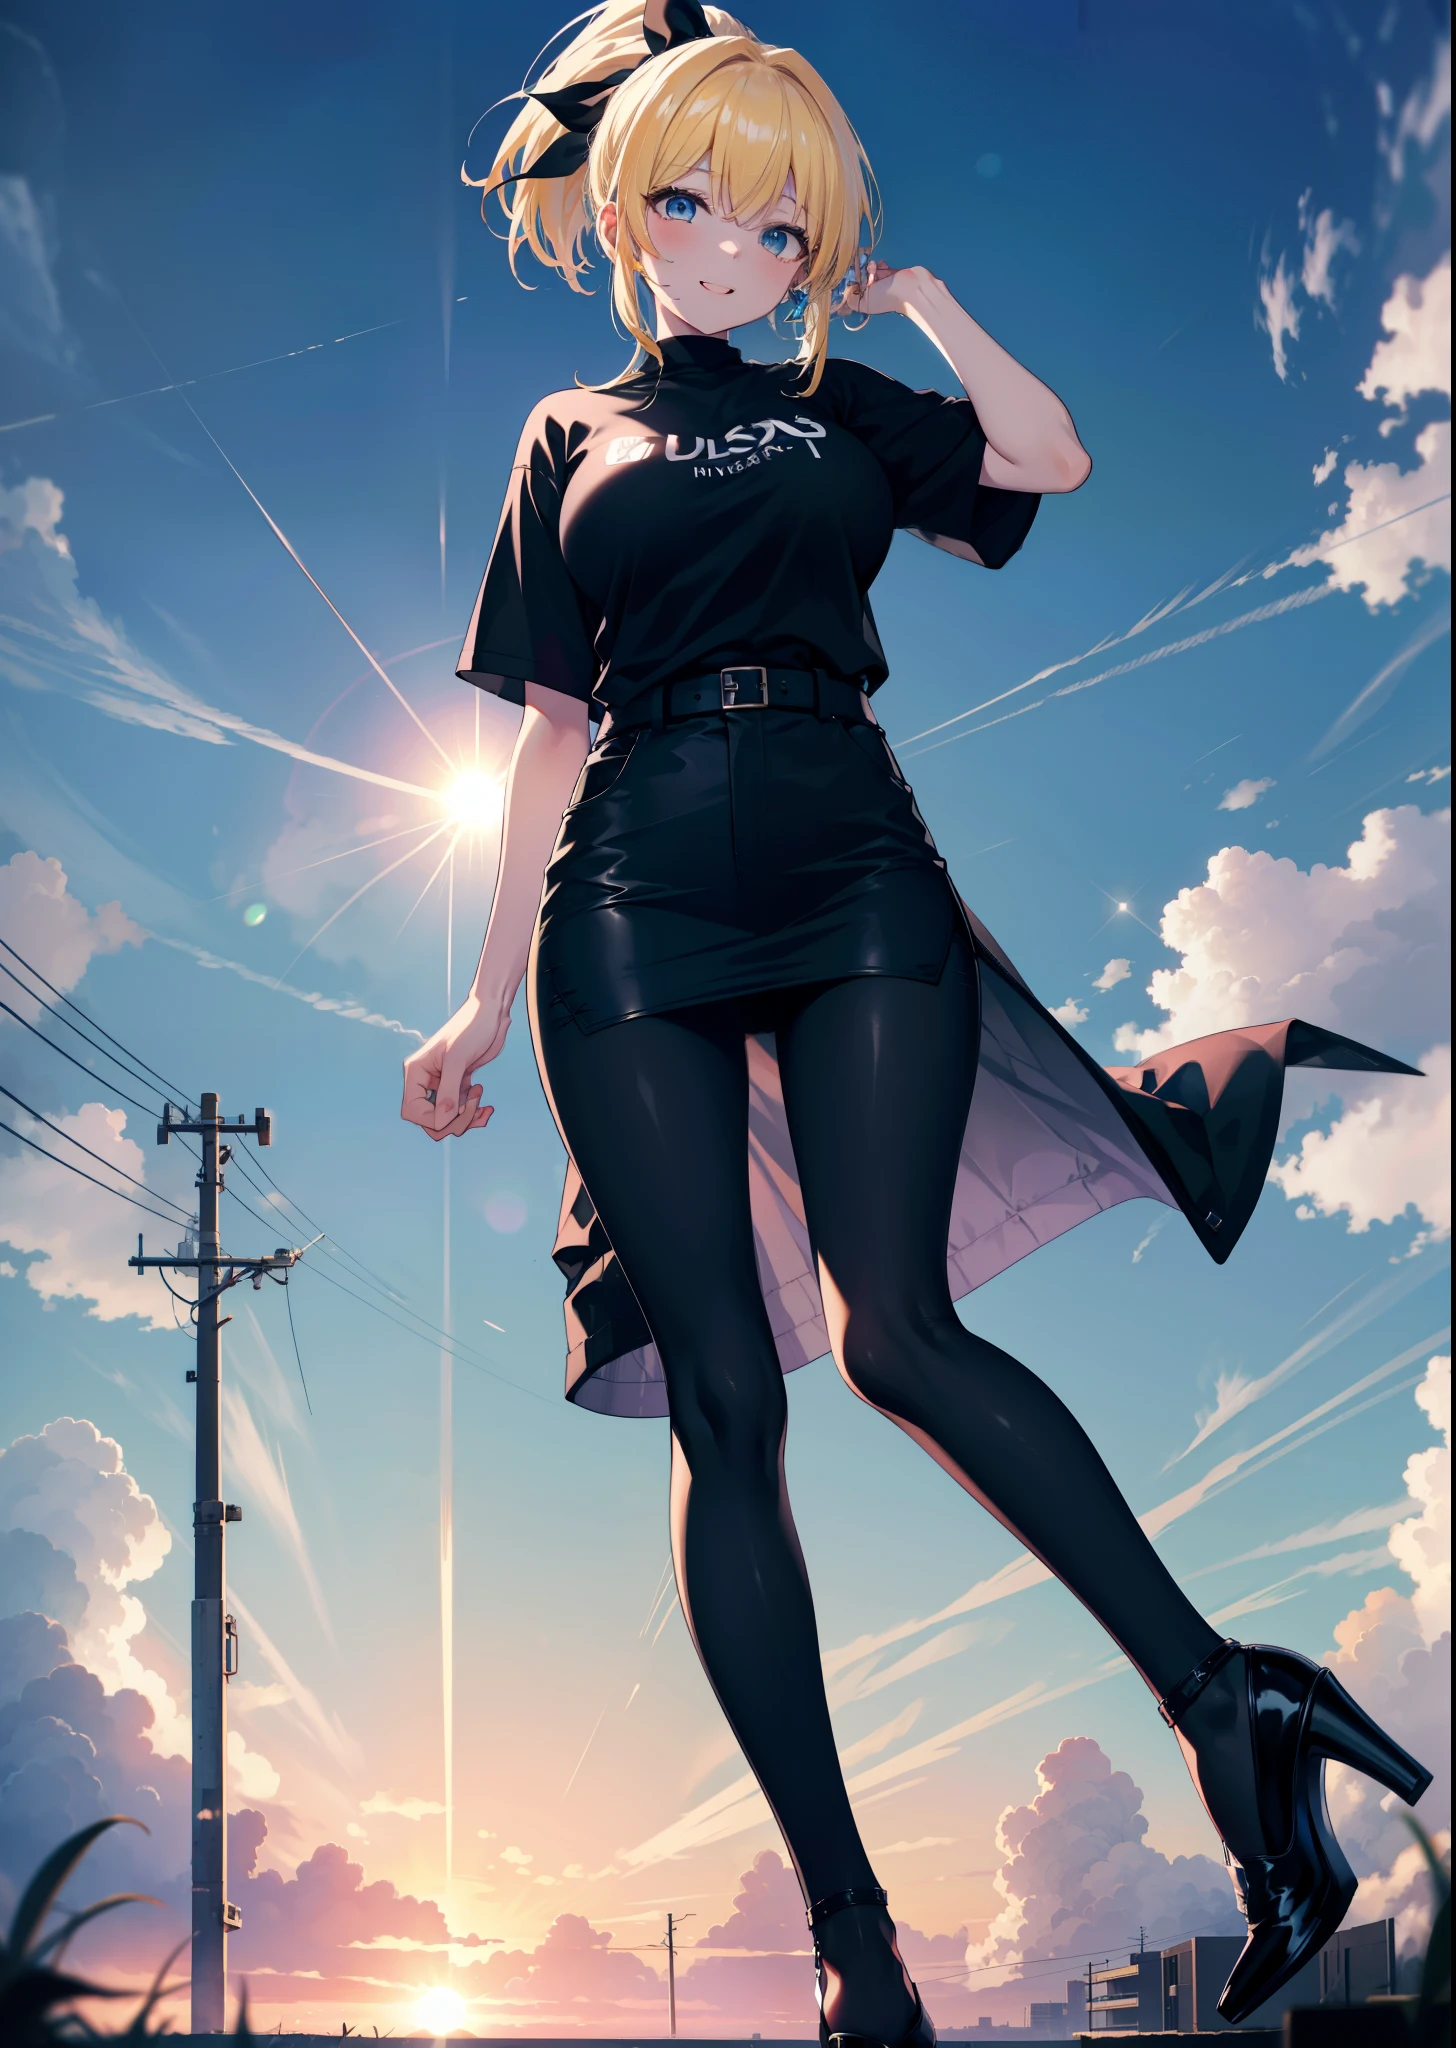 Eliase, catalyst, Yellow Hair, blue eyes,ponytail, Hair Ribbon,happy smile, smile, Open your mouth, Oversized black y-shirt,Big Breasts,black skinny pants,Stiletto heels,morning,morning陽,The sun is rising,walking,whole bodyがイラストに入るように,Looking down from above,
break looking at viewer,whole body,
break outdoors, In town,
break (masterpiece:1.2), highest quality, High resolution, unity 8k wallpaper, (figure:0.8), (Beautiful fine details:1.6), Highly detailed face, Perfect lighting, Highly detailed CG, (Perfect hands, Perfect Anatomy),